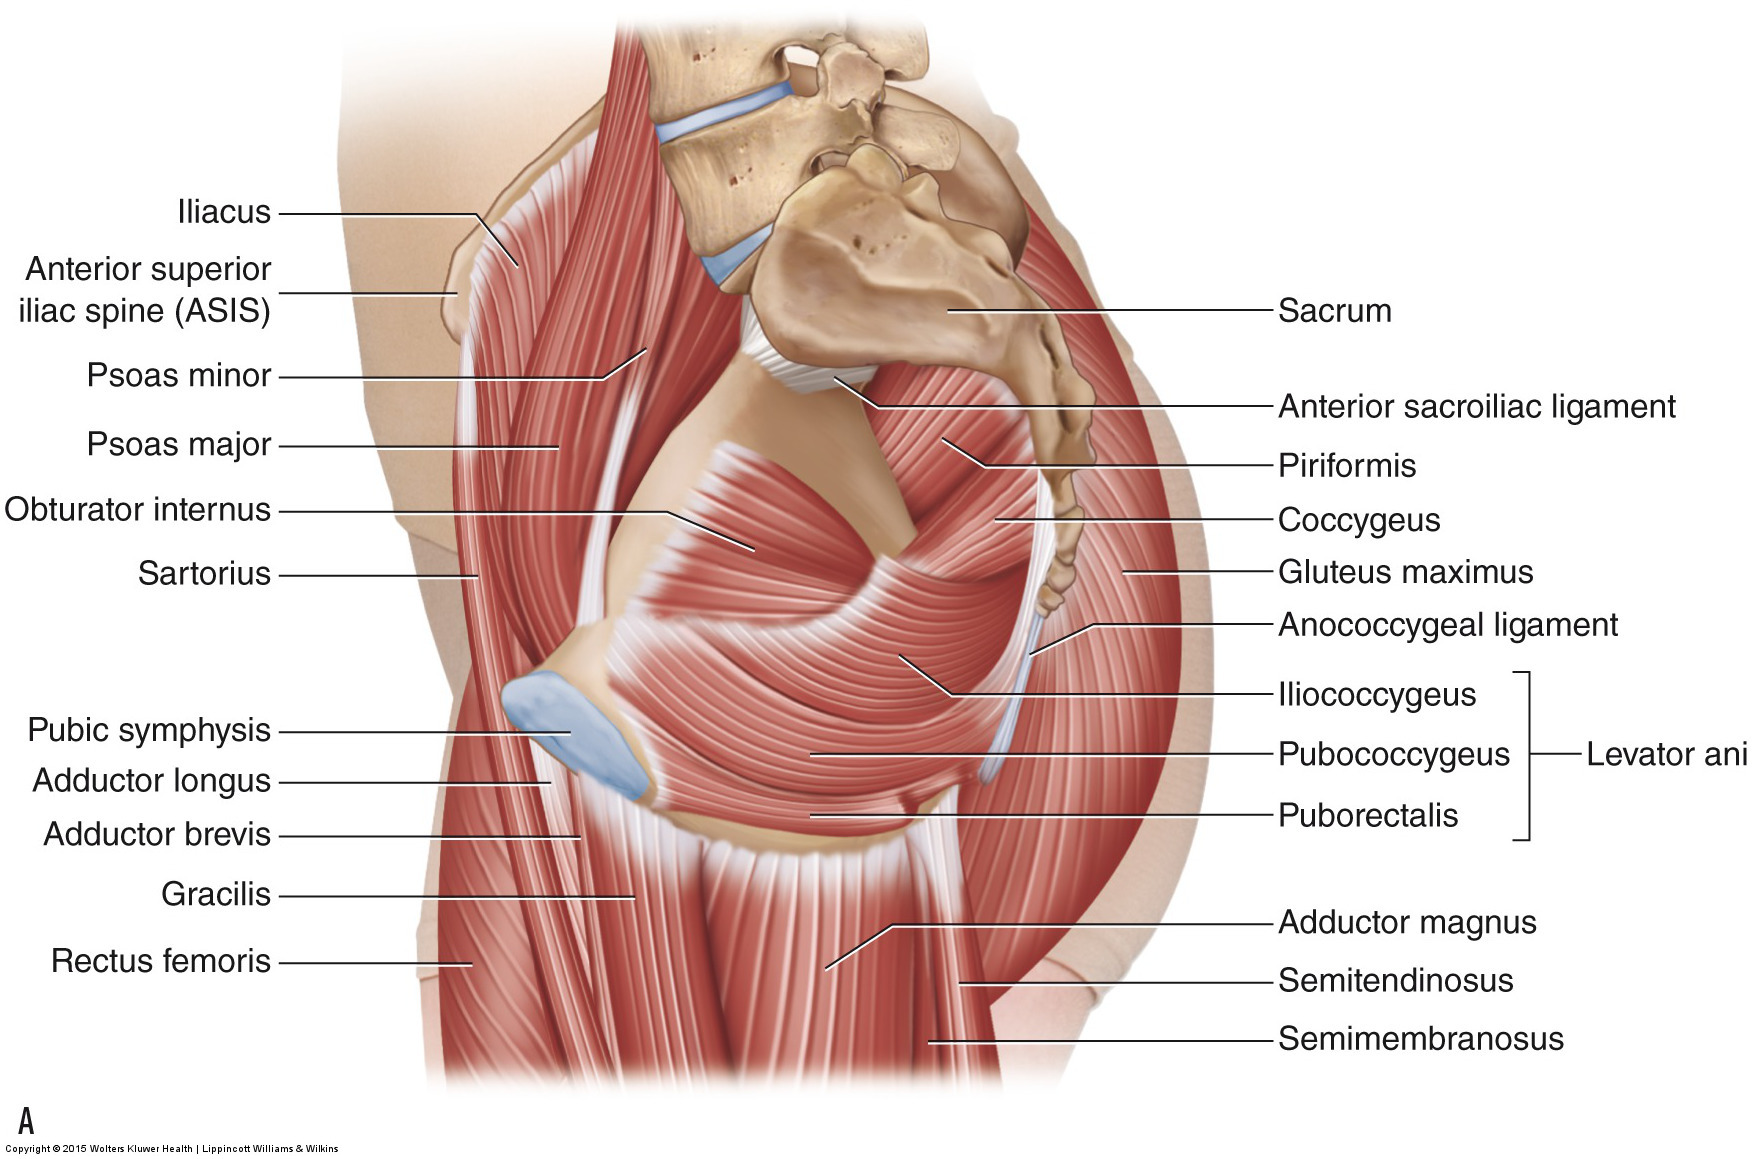 Medial and superior views of the muscles of the pelvic floor